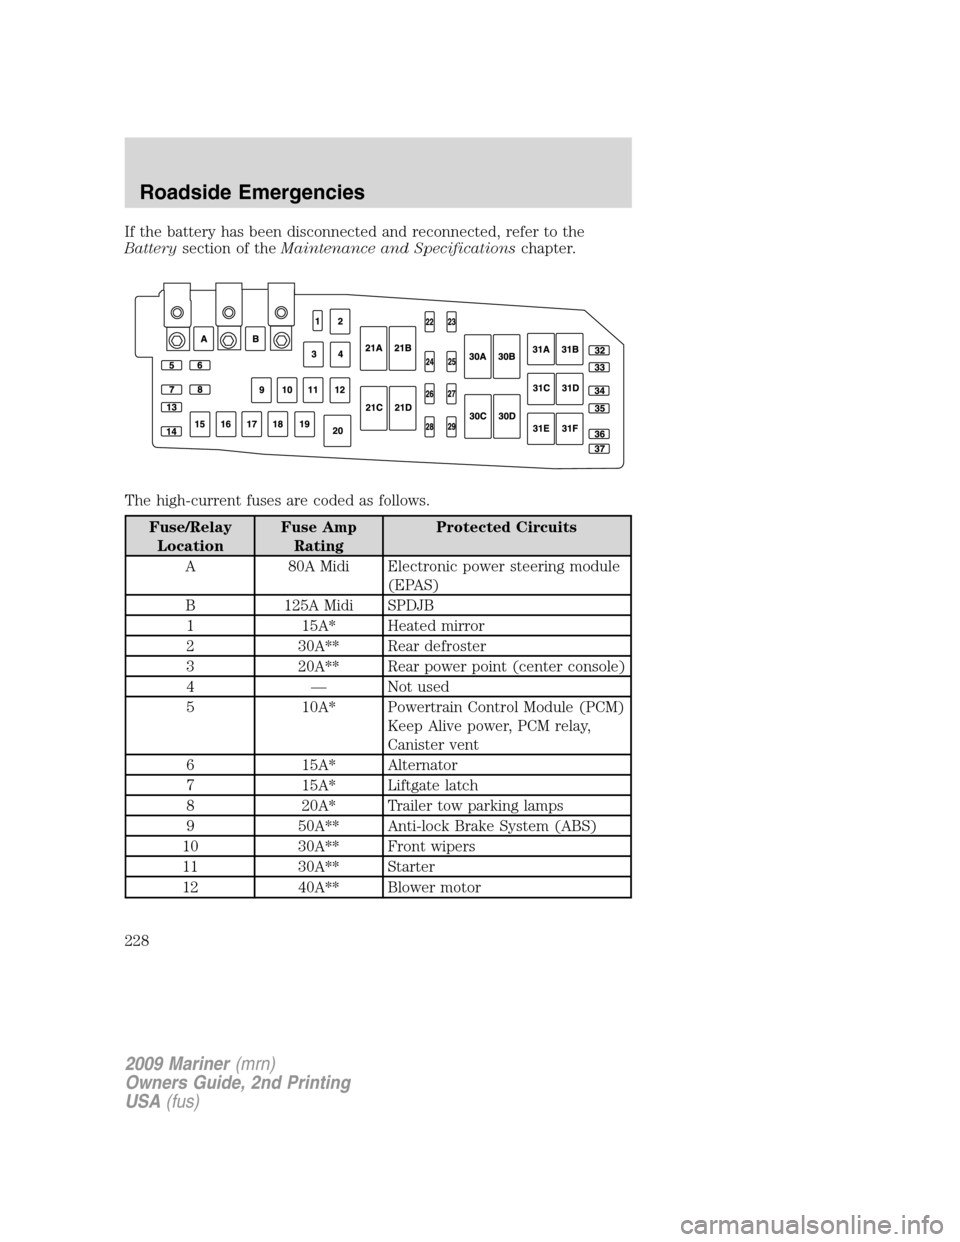 Mercury Mariner 2009  Owners Manuals If the battery has been disconnected and reconnected, refer to the
Batterysection of theMaintenance and Specificationschapter.
The high-current fuses are coded as follows.
Fuse/Relay
LocationFuse Amp
